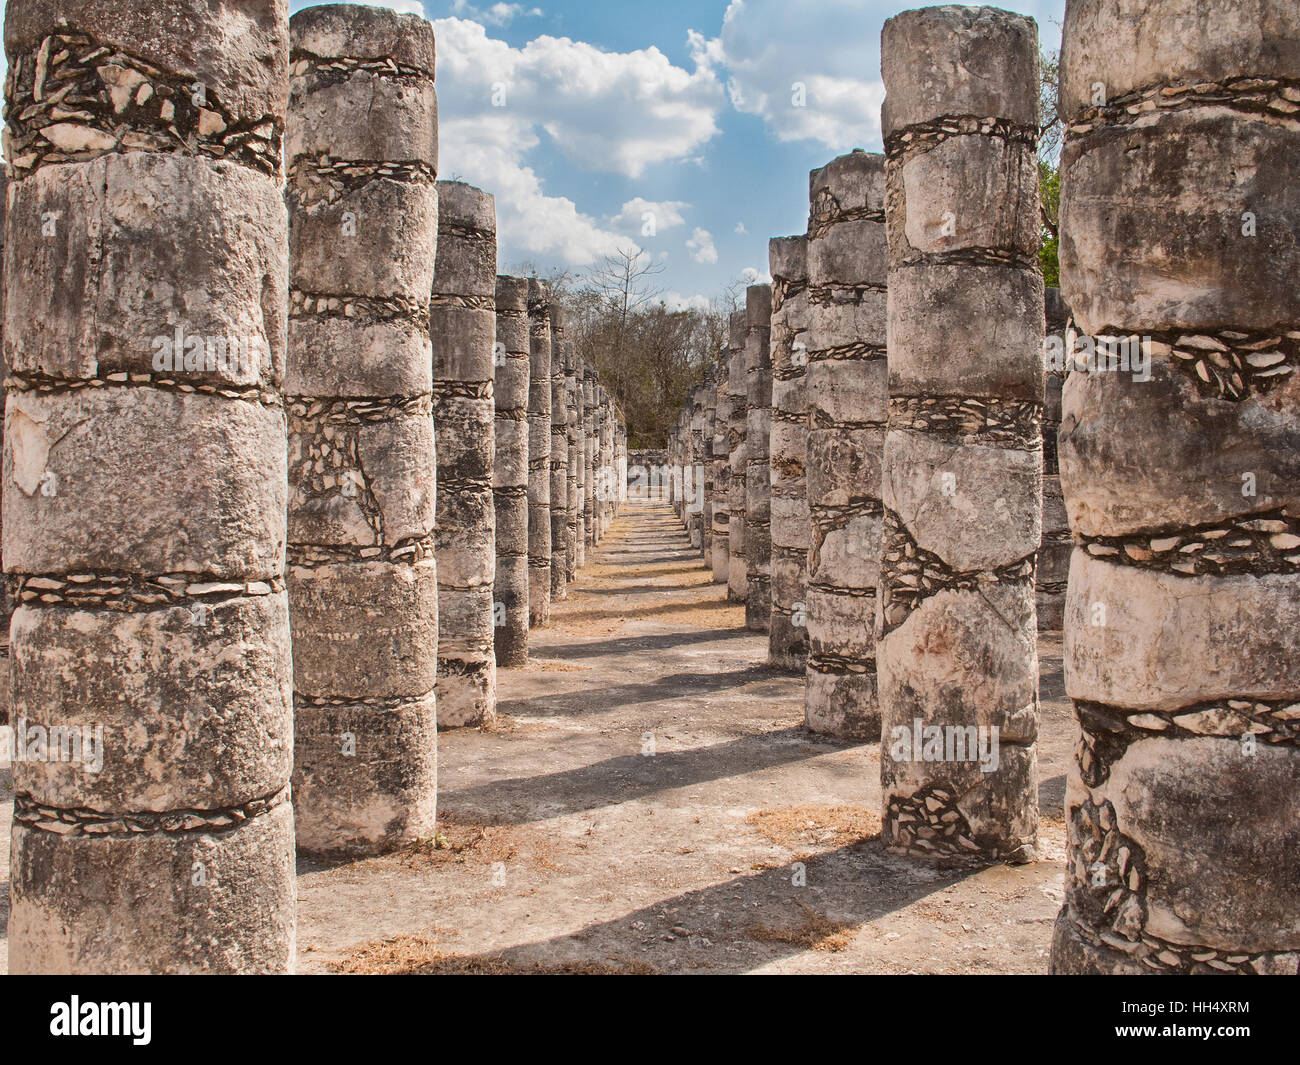 At Chichen Itza - The Plaza of a Thousand Columns taken latter in the day so the columns have nice shading and shadowstravel Stock Photo